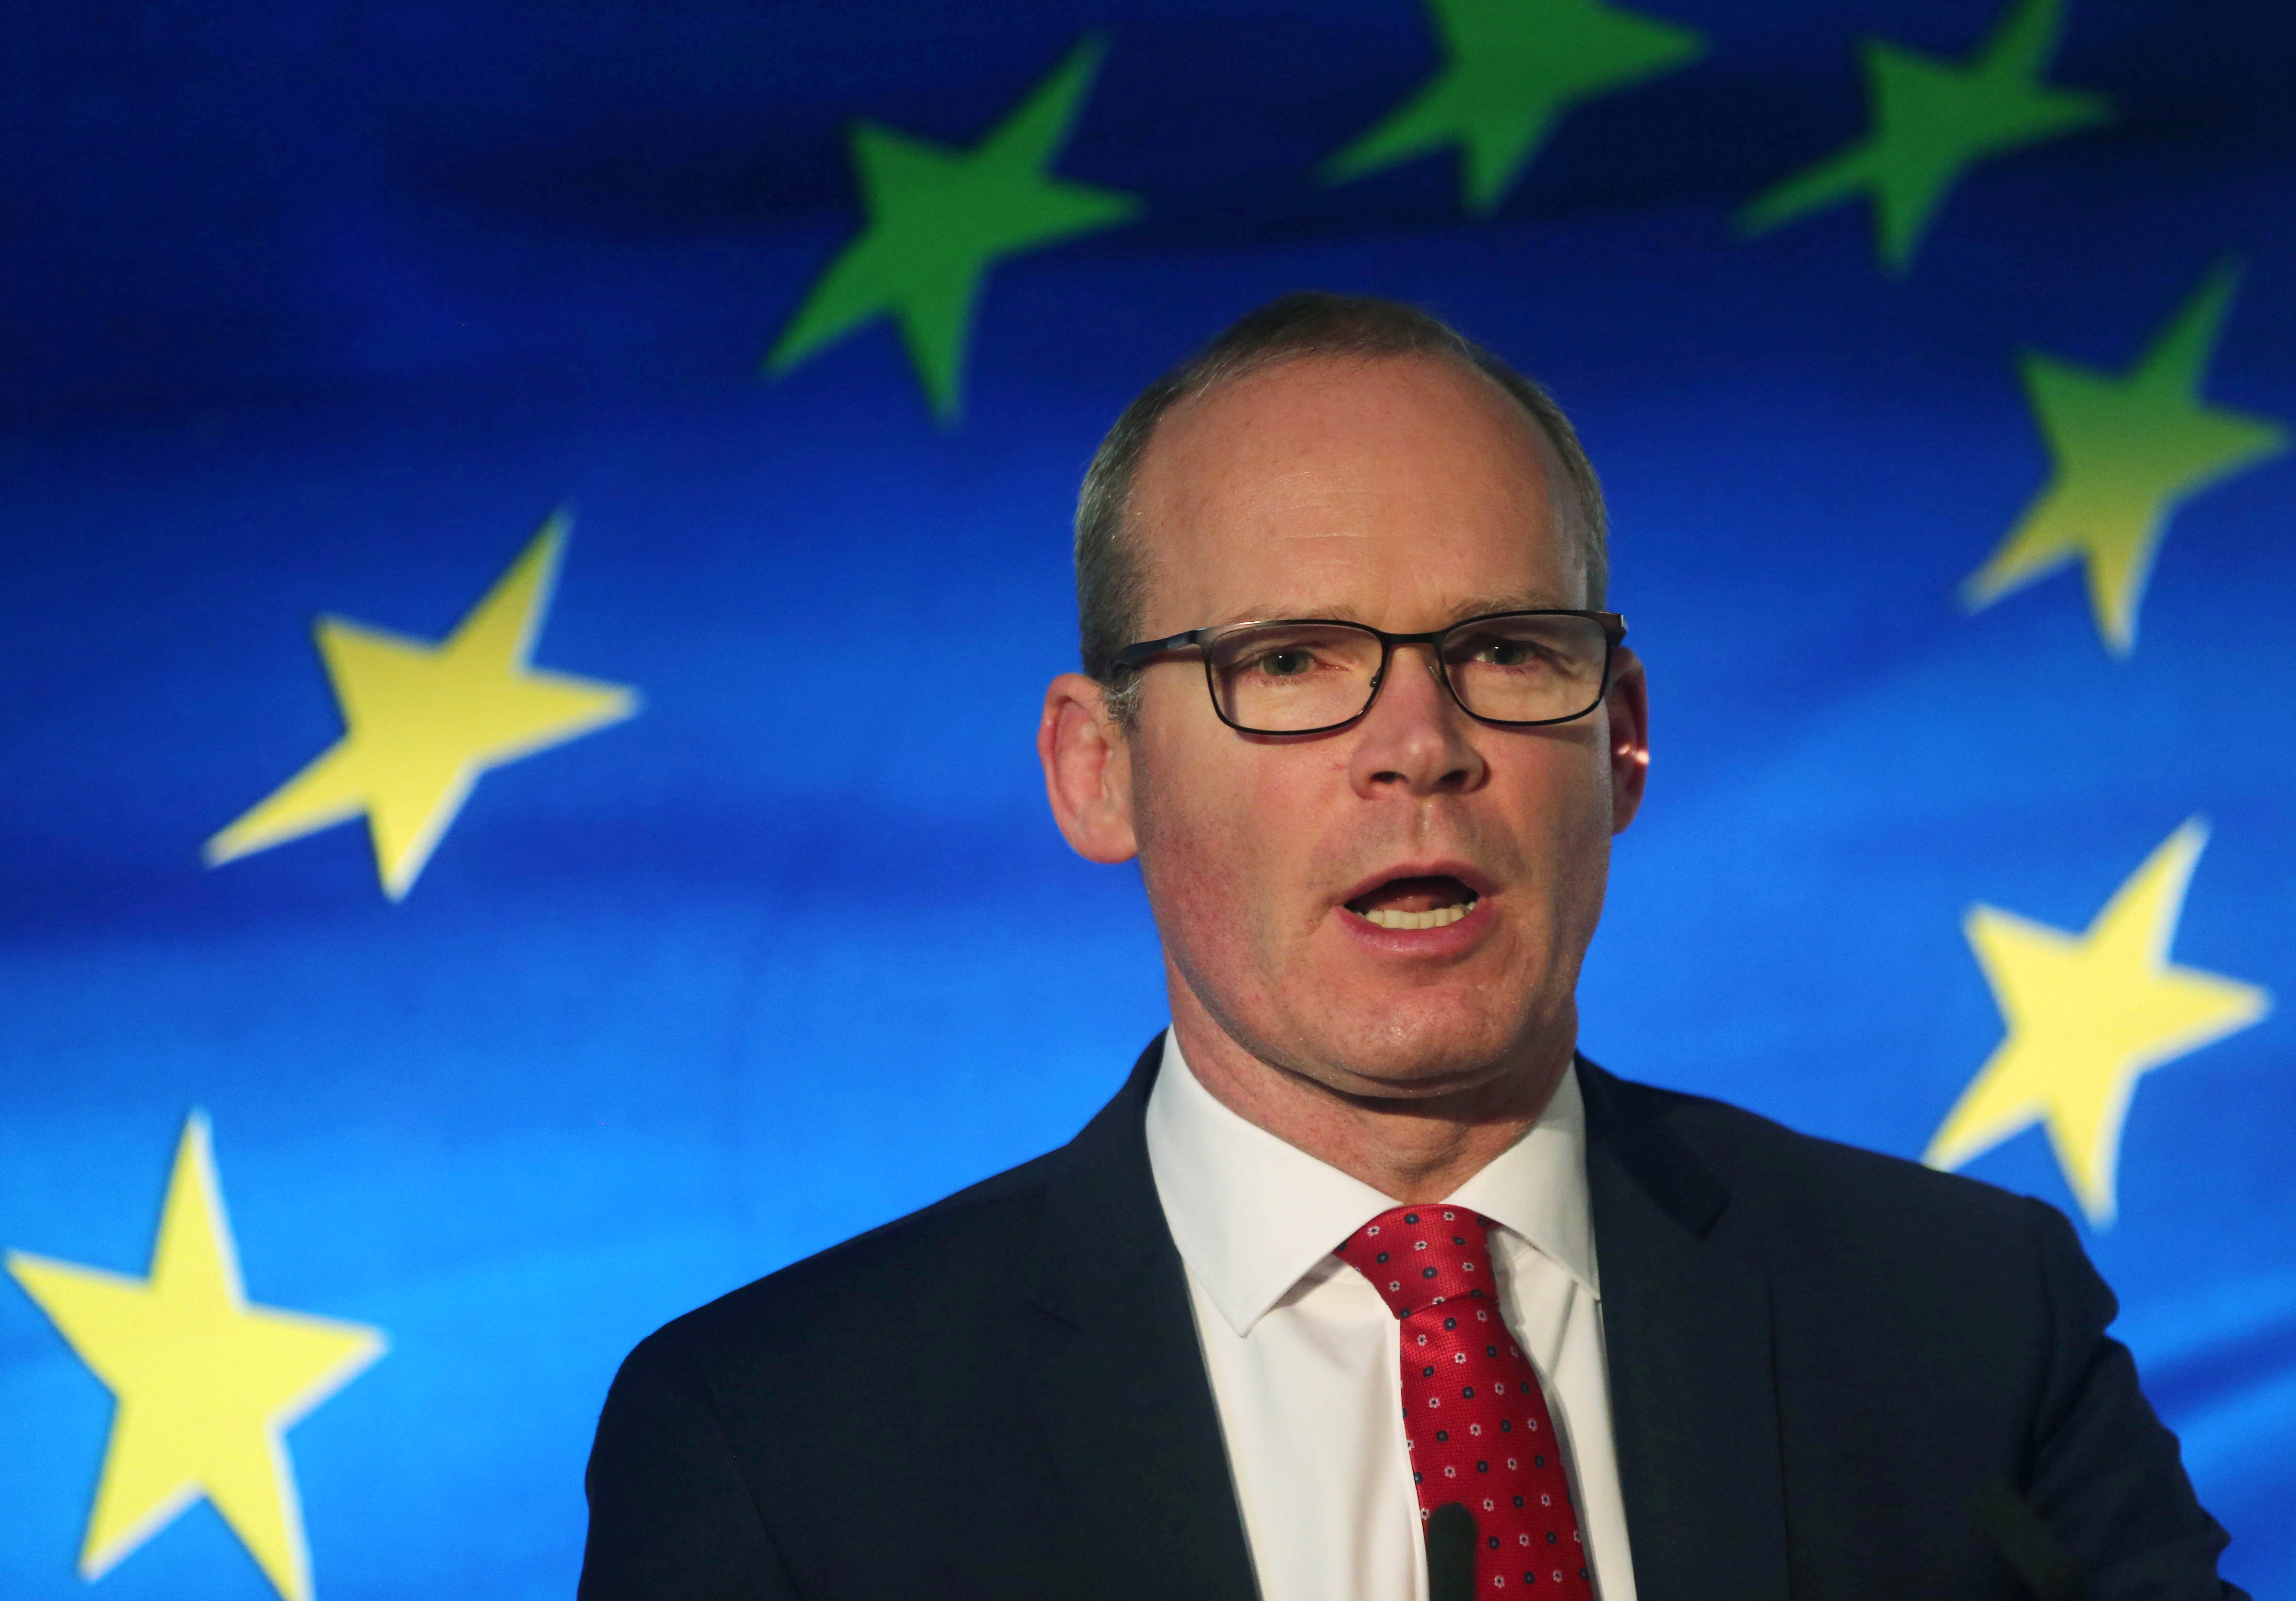 Irish Minister for Foreign Affairs Coveney speaks at the launch of his party's manifesto for the Irish General Election in Dublin